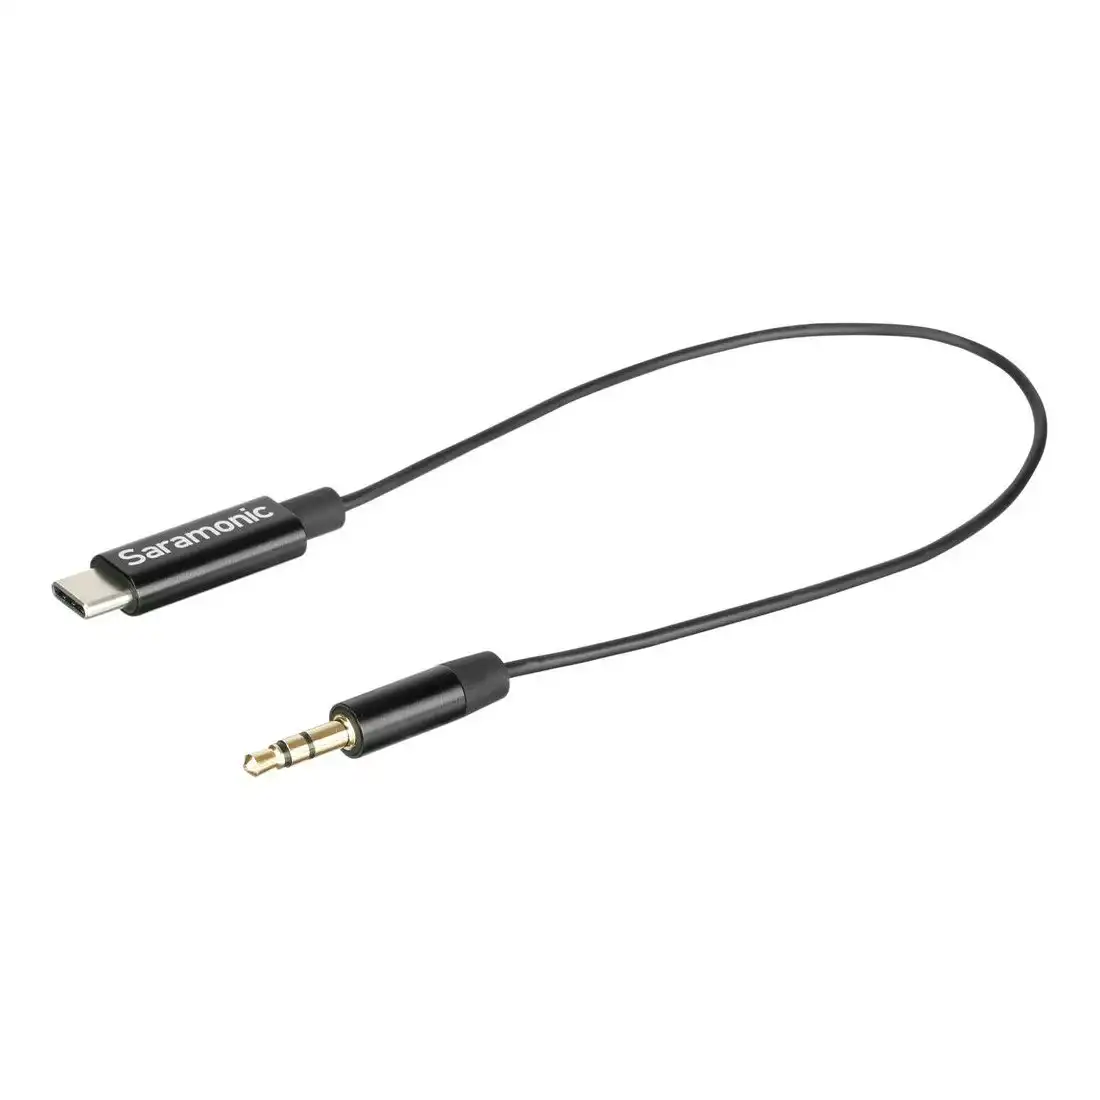 Saramonic SR-C2001 3.5mm Male TRS to USB-C Audio Adapter Cable